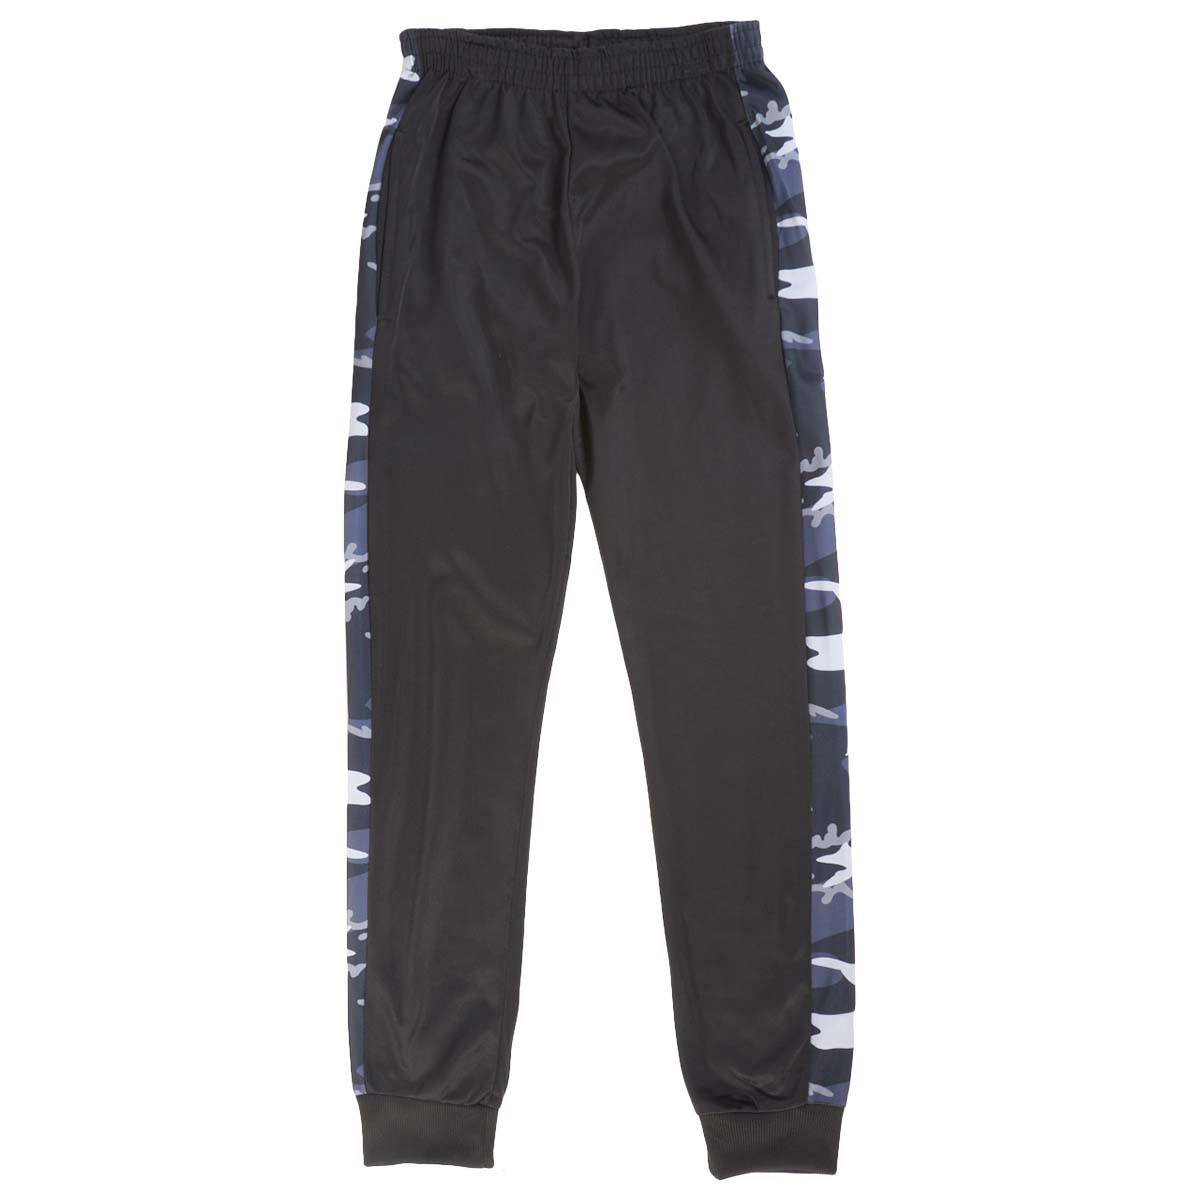 Boys (8-20) Starting Point Tricot Joggers